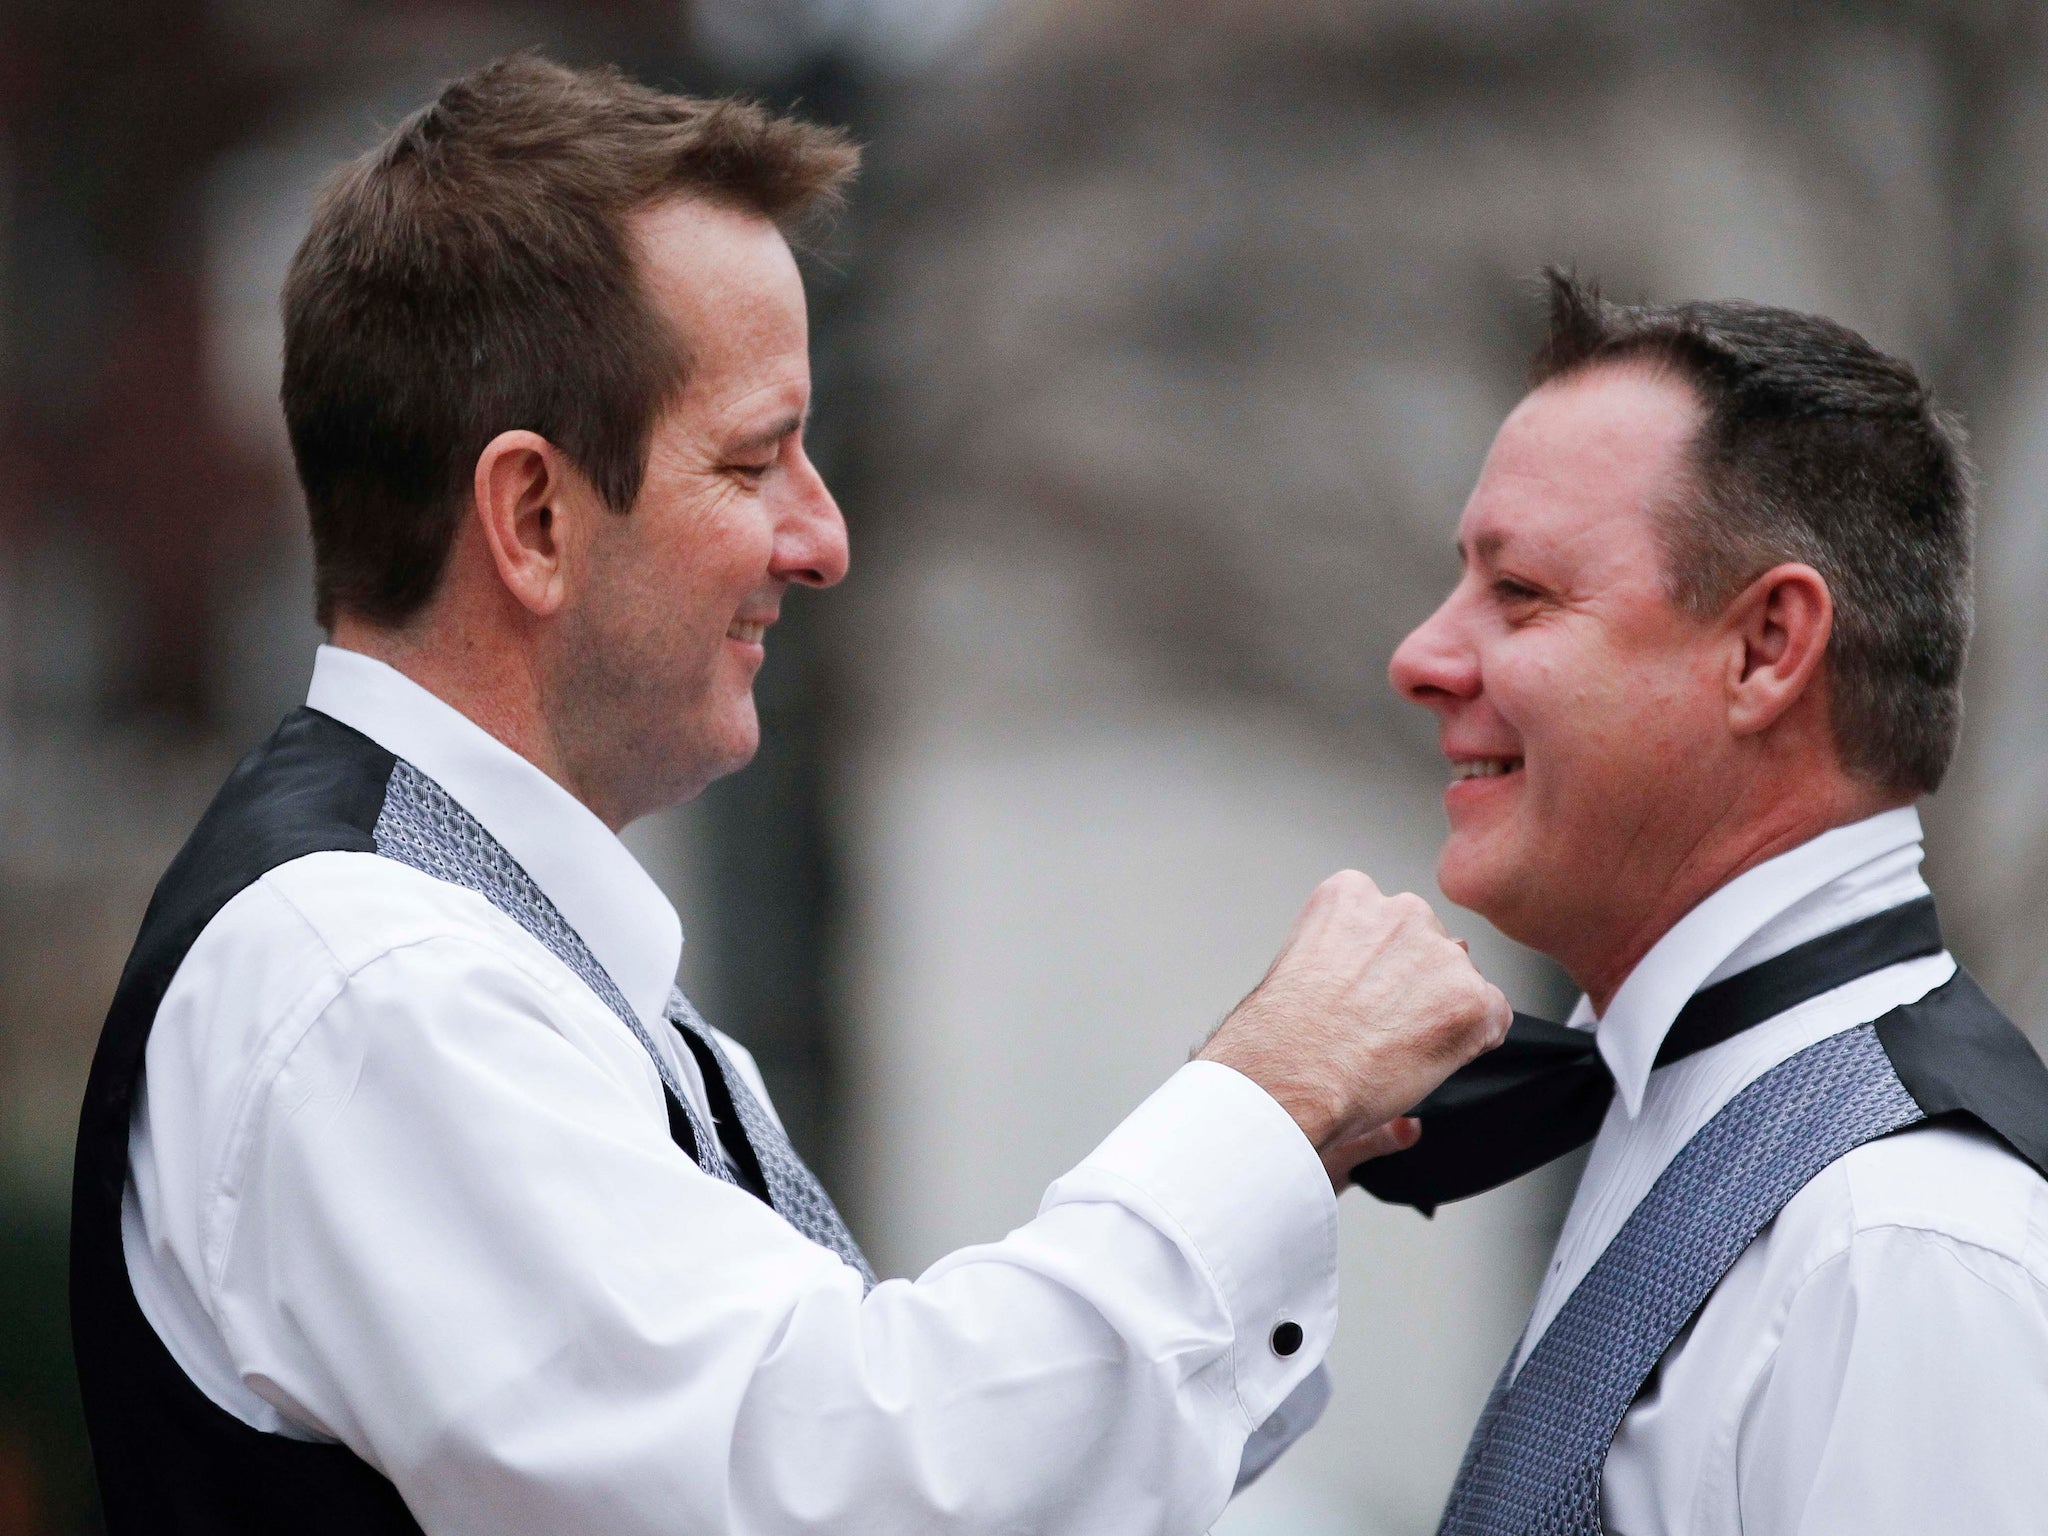 A couple who gave their names as Greg and Roger prepare to get married in Birmingham, Alabama on Monday